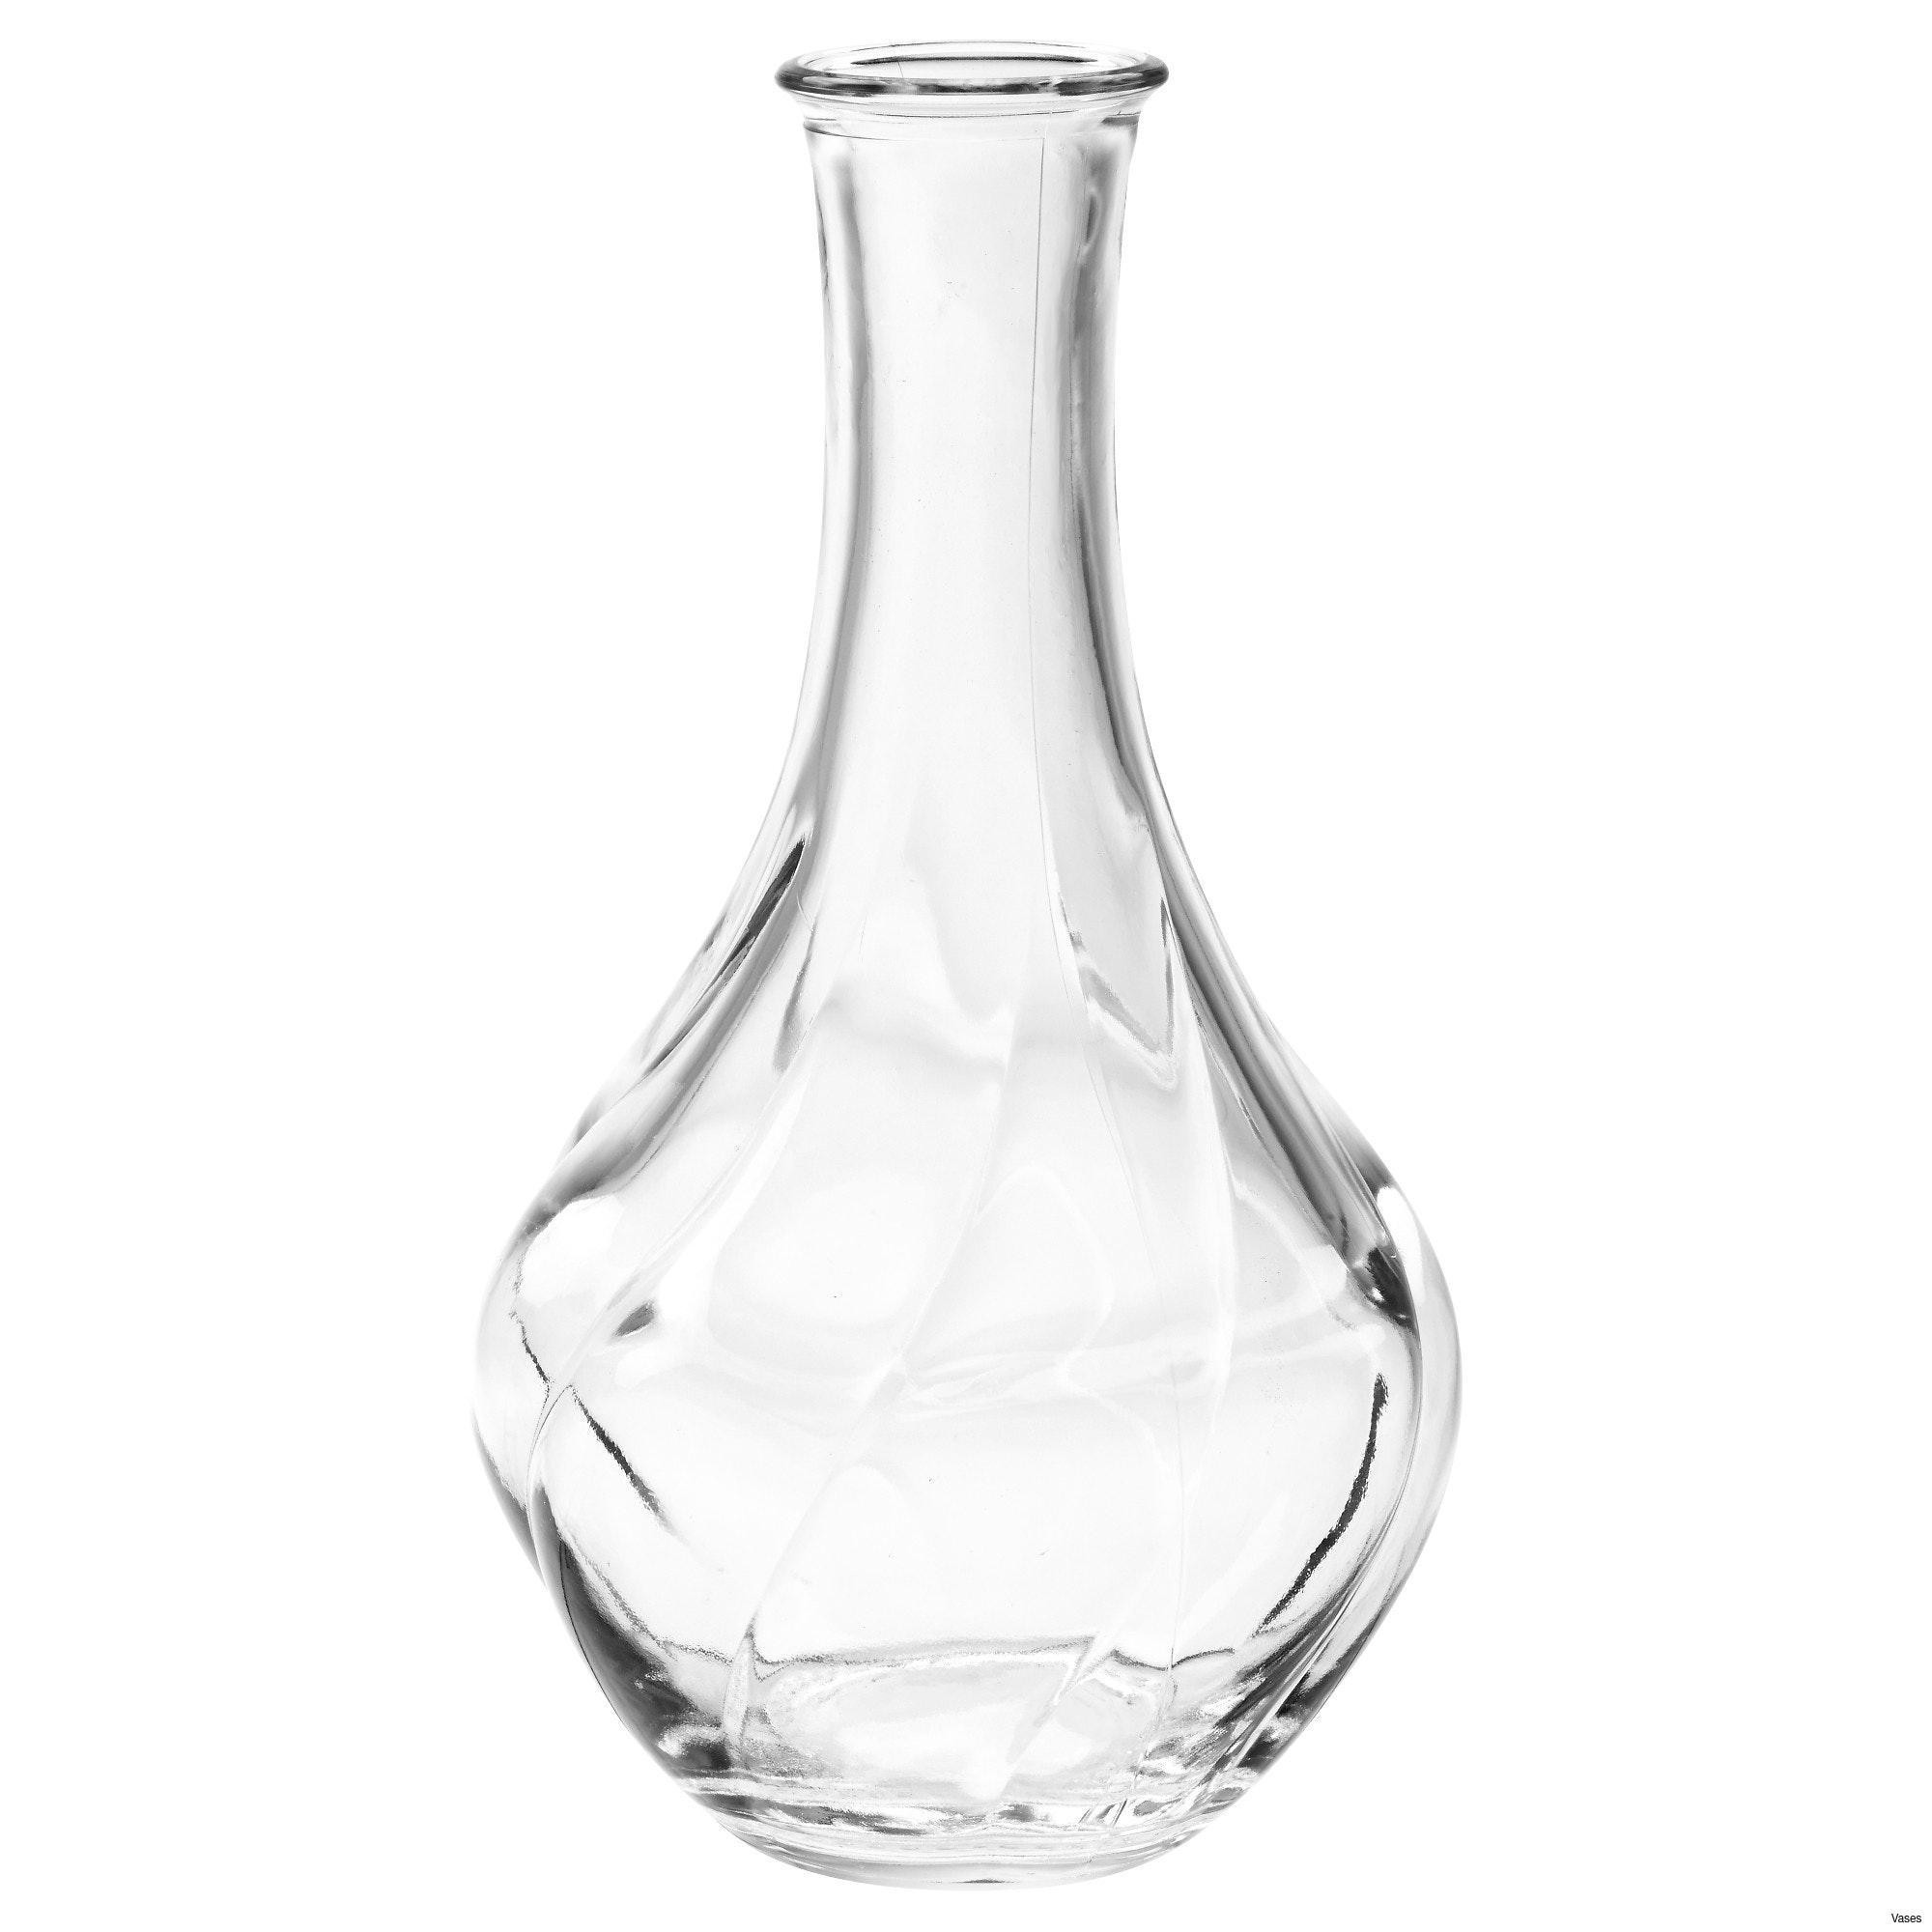 16 Fantastic Hand Blown Glass Vase 2023 free download hand blown glass vase of collection of extra large glass vase vases artificial plants pertaining to extra large glass vase image living room glass vases fresh clear vase 0d tags amazing and